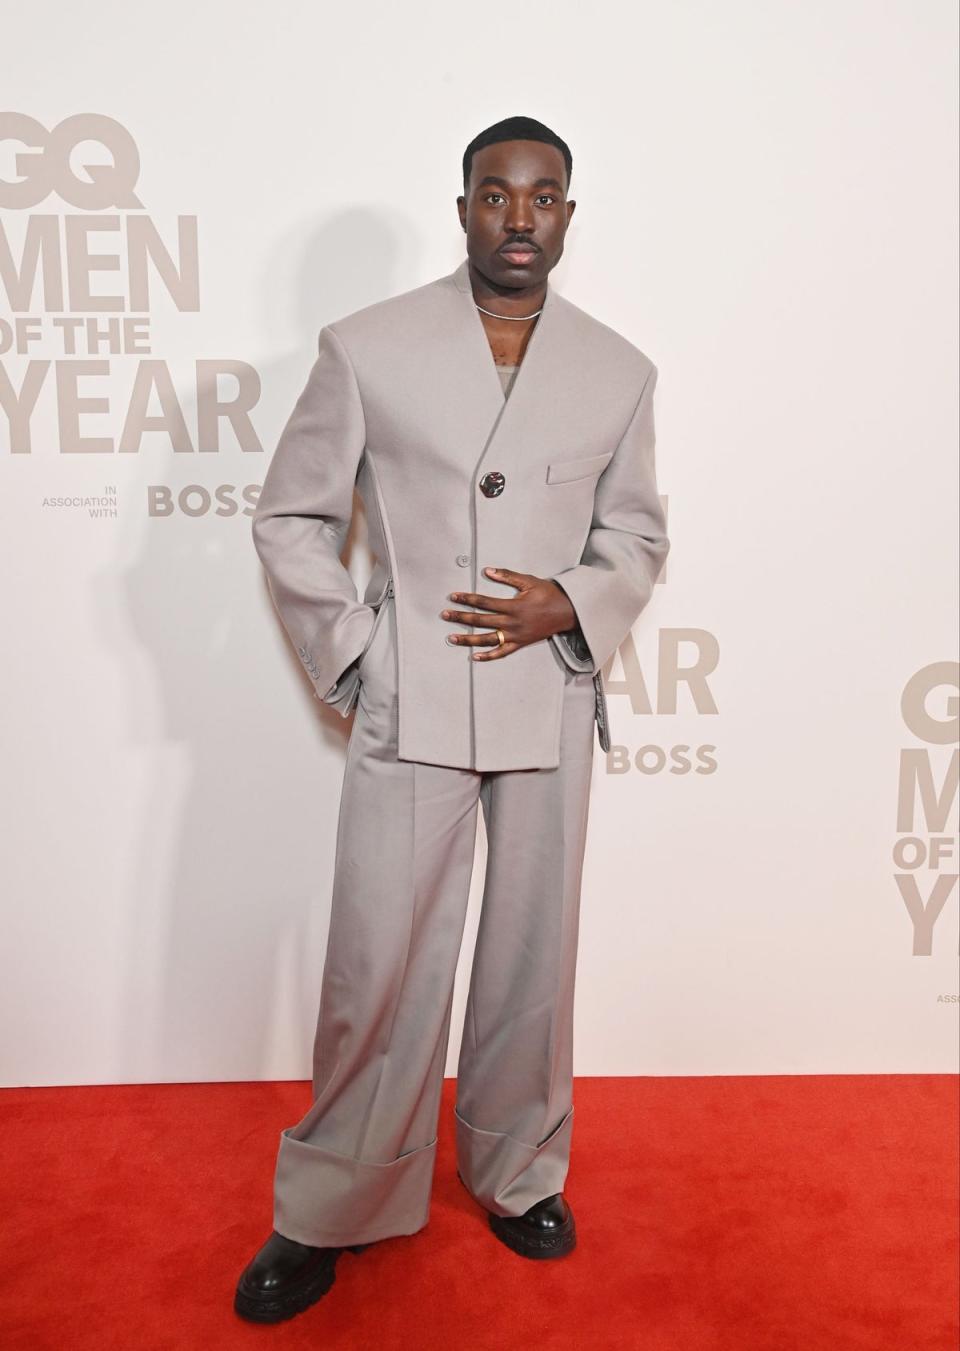 Paapa Essiedu at the GQ Men of the Year Awards (Dave Benett)